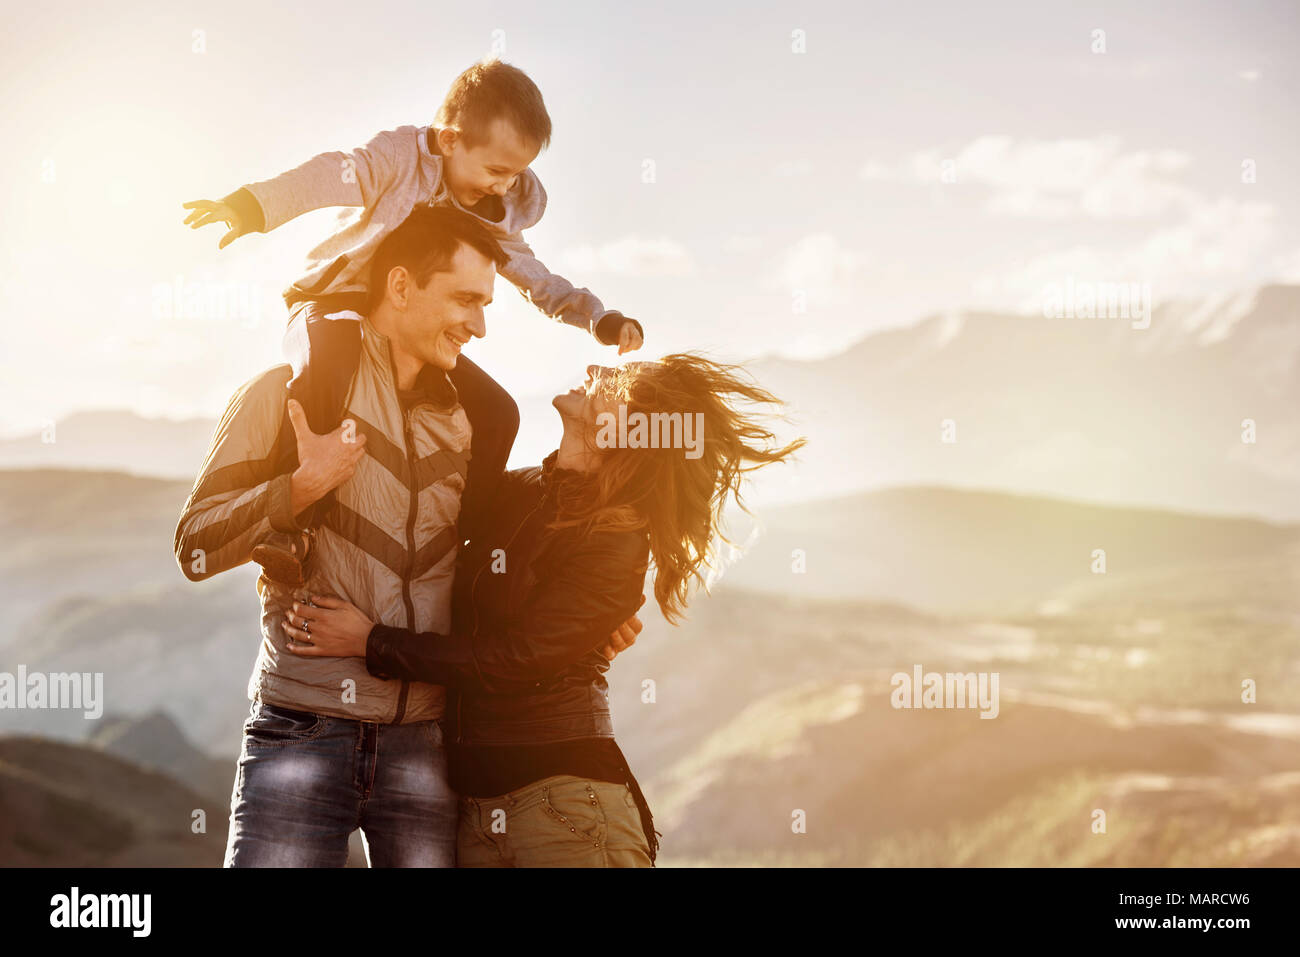 Falimy with little child is walking at sunset time in mountains area Stock Photo